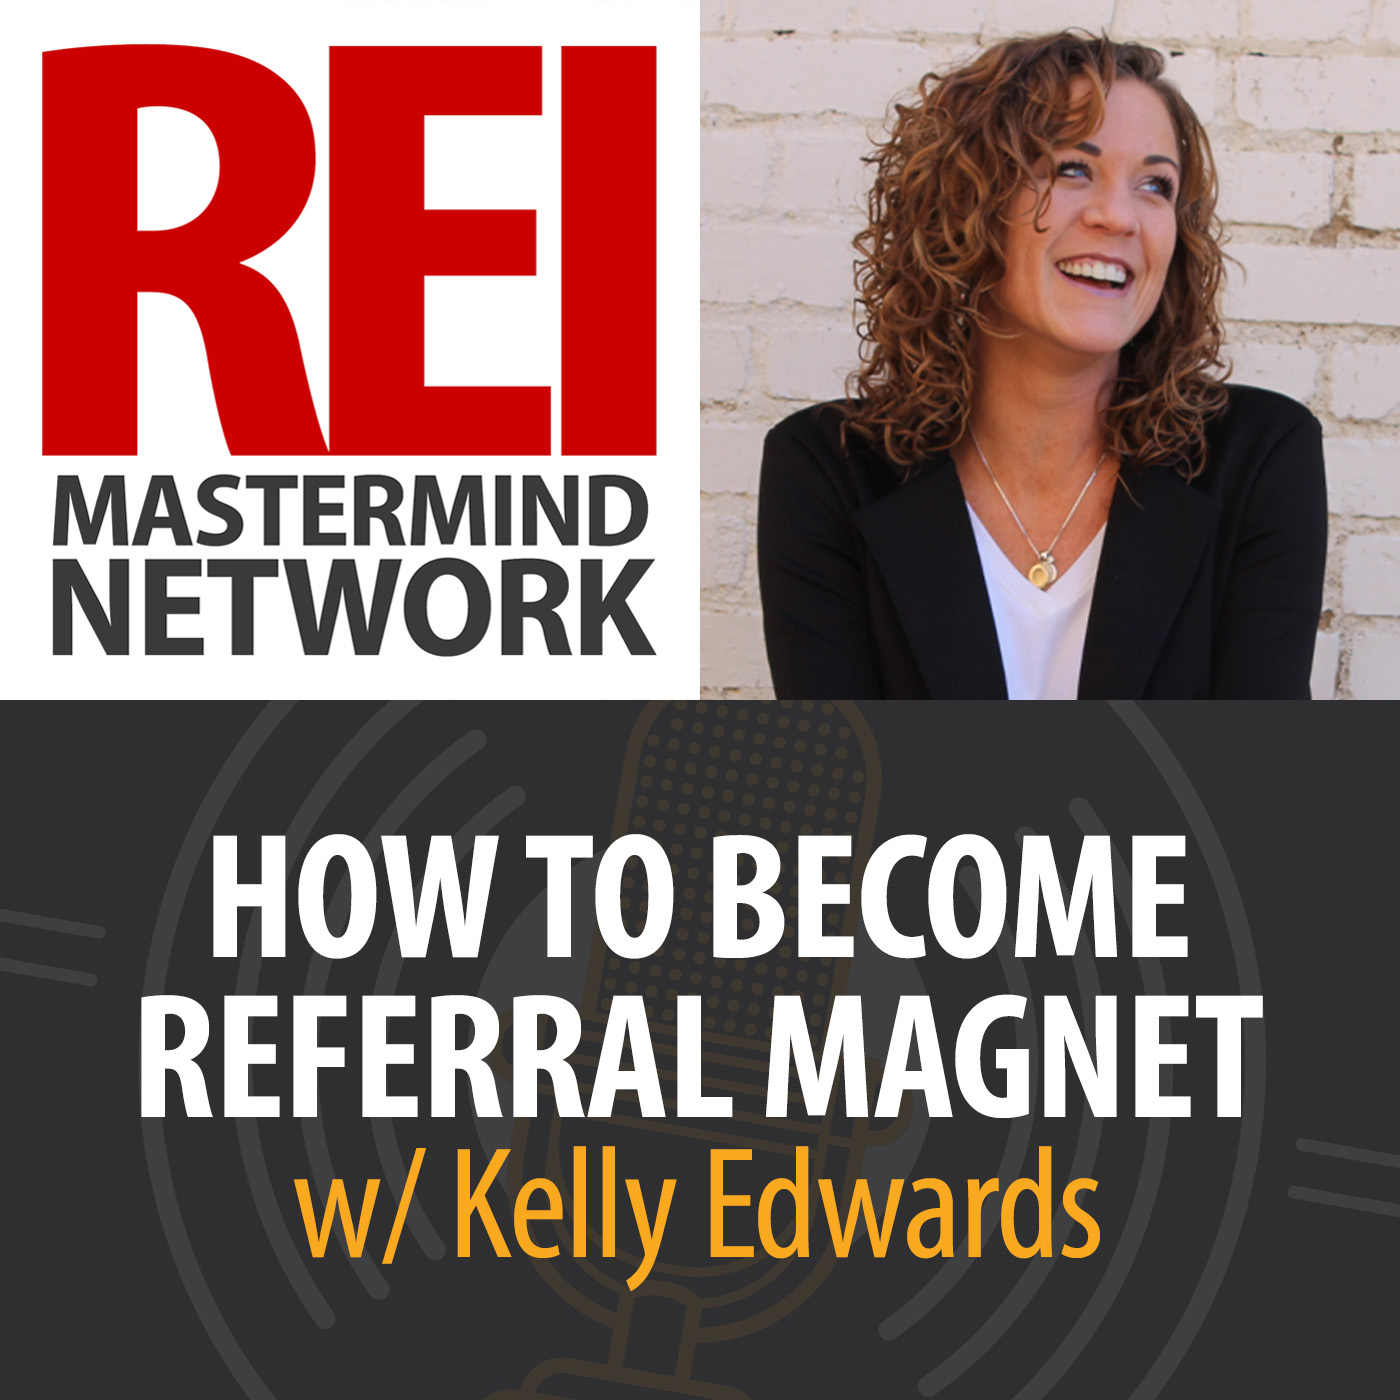 How to Become a Referral Magnet with Kelly Edwards Image